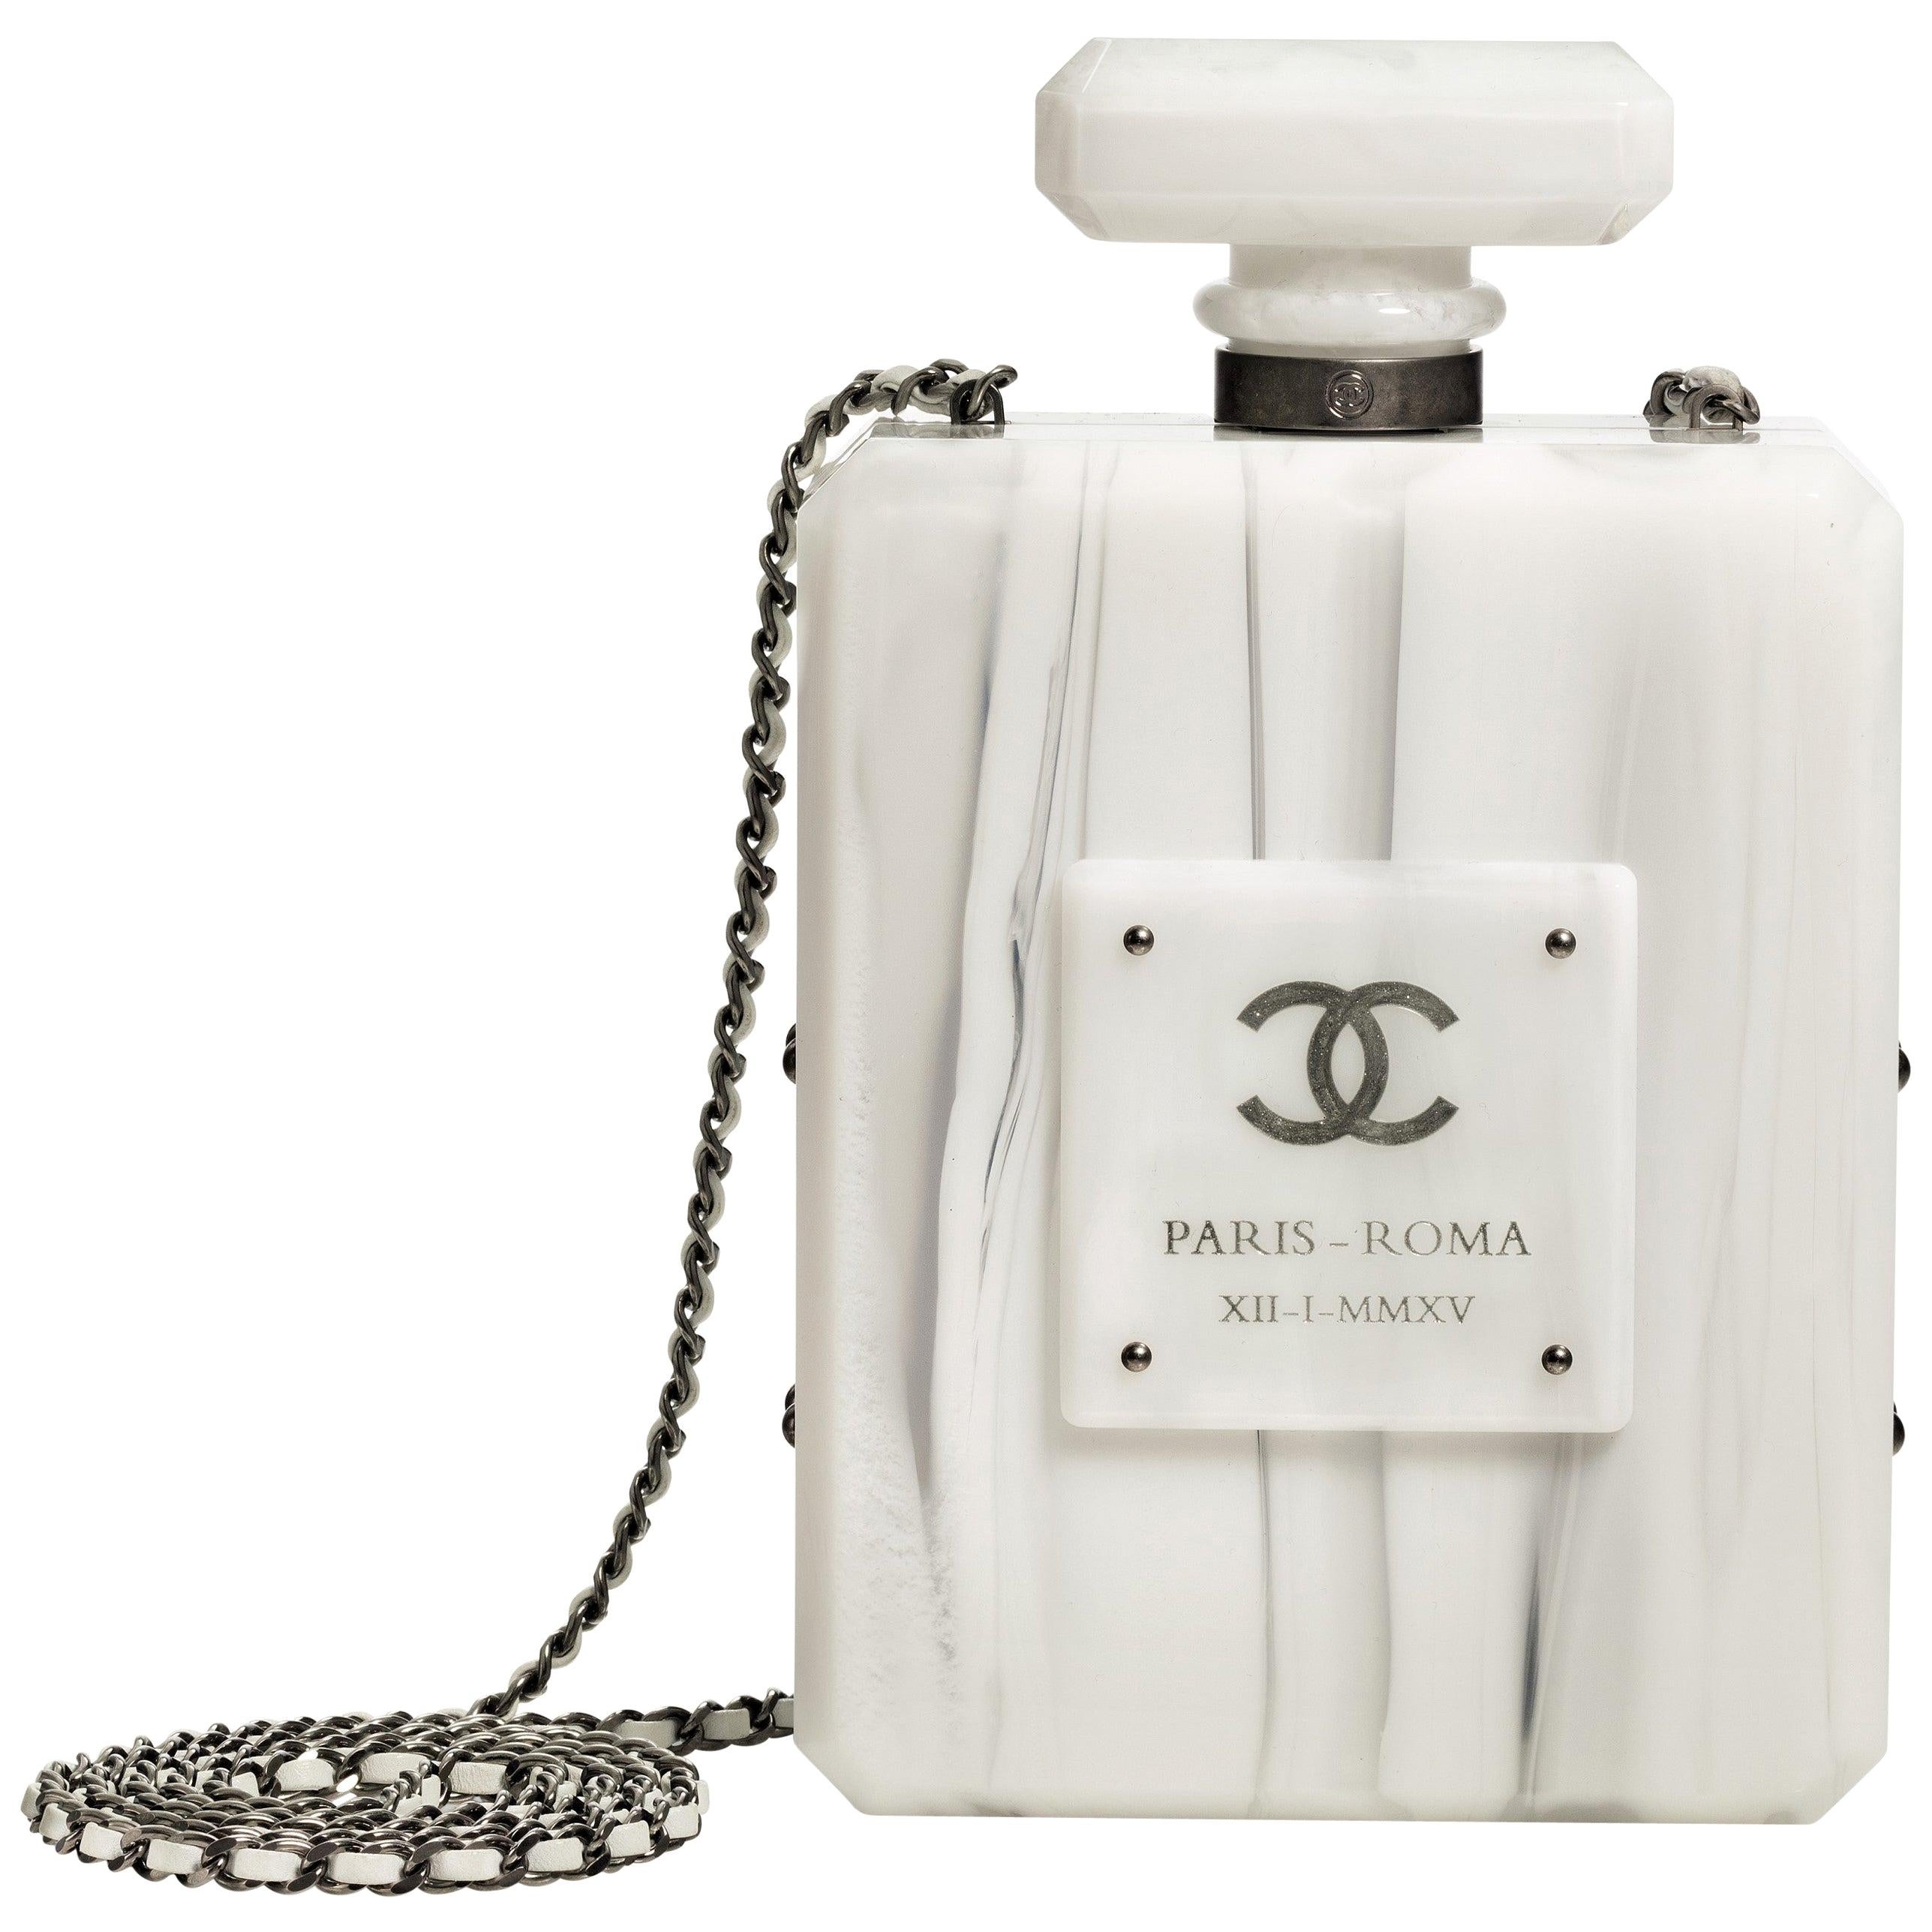 Chanel NEW Runway White Marble Lucite Evening Bottle Shoulder Bag in Box 